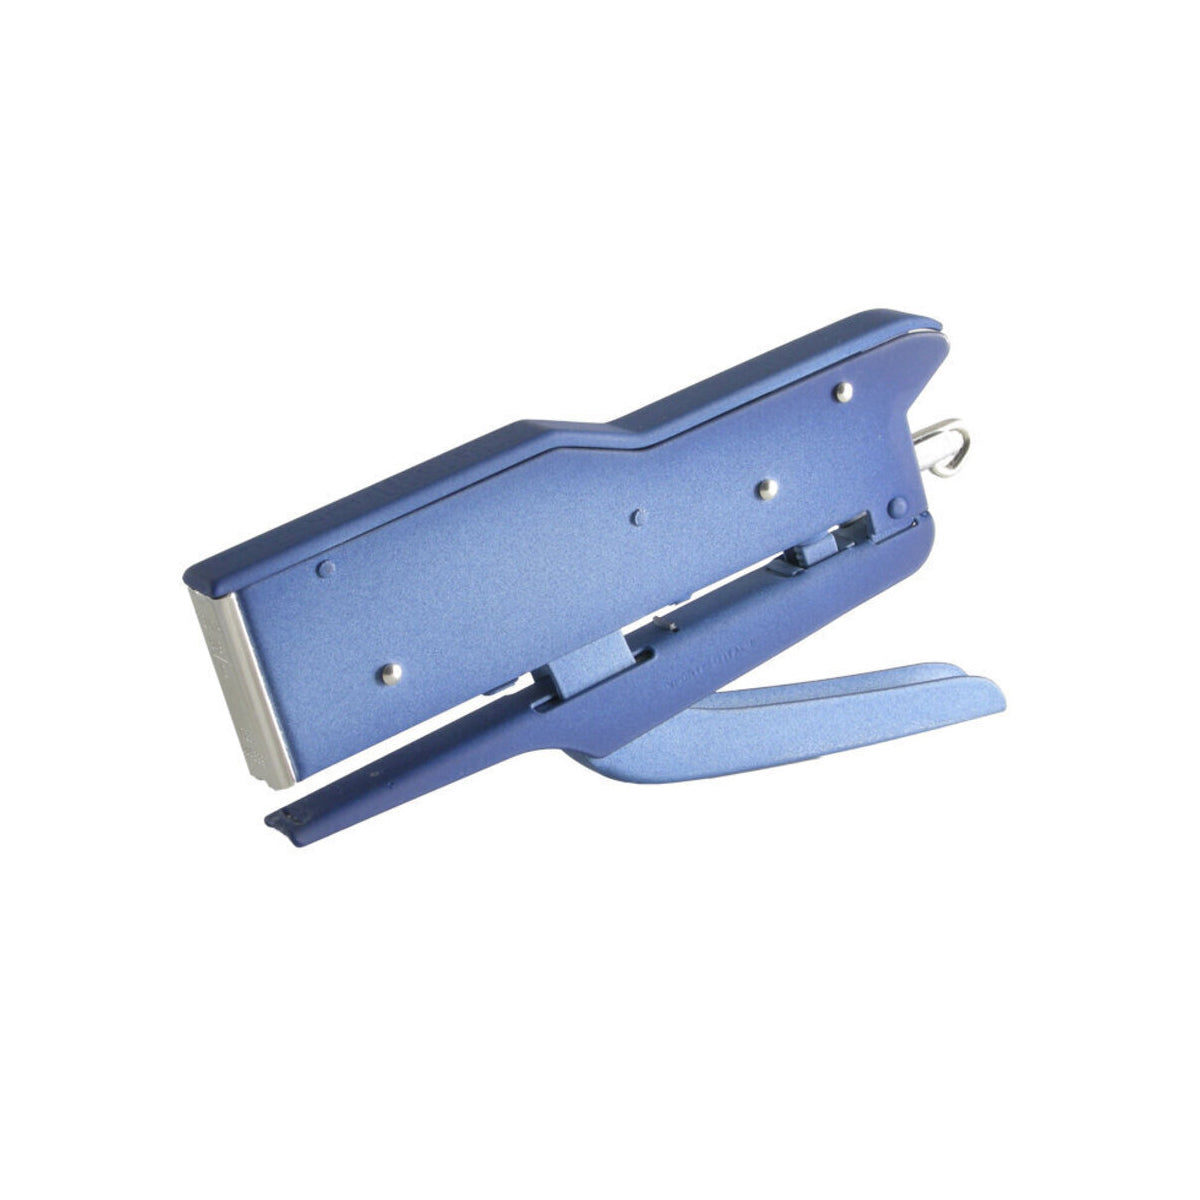 Zenith 548/E Blue Jeans Pliers Stapler - Limited Edition - Made in Italy